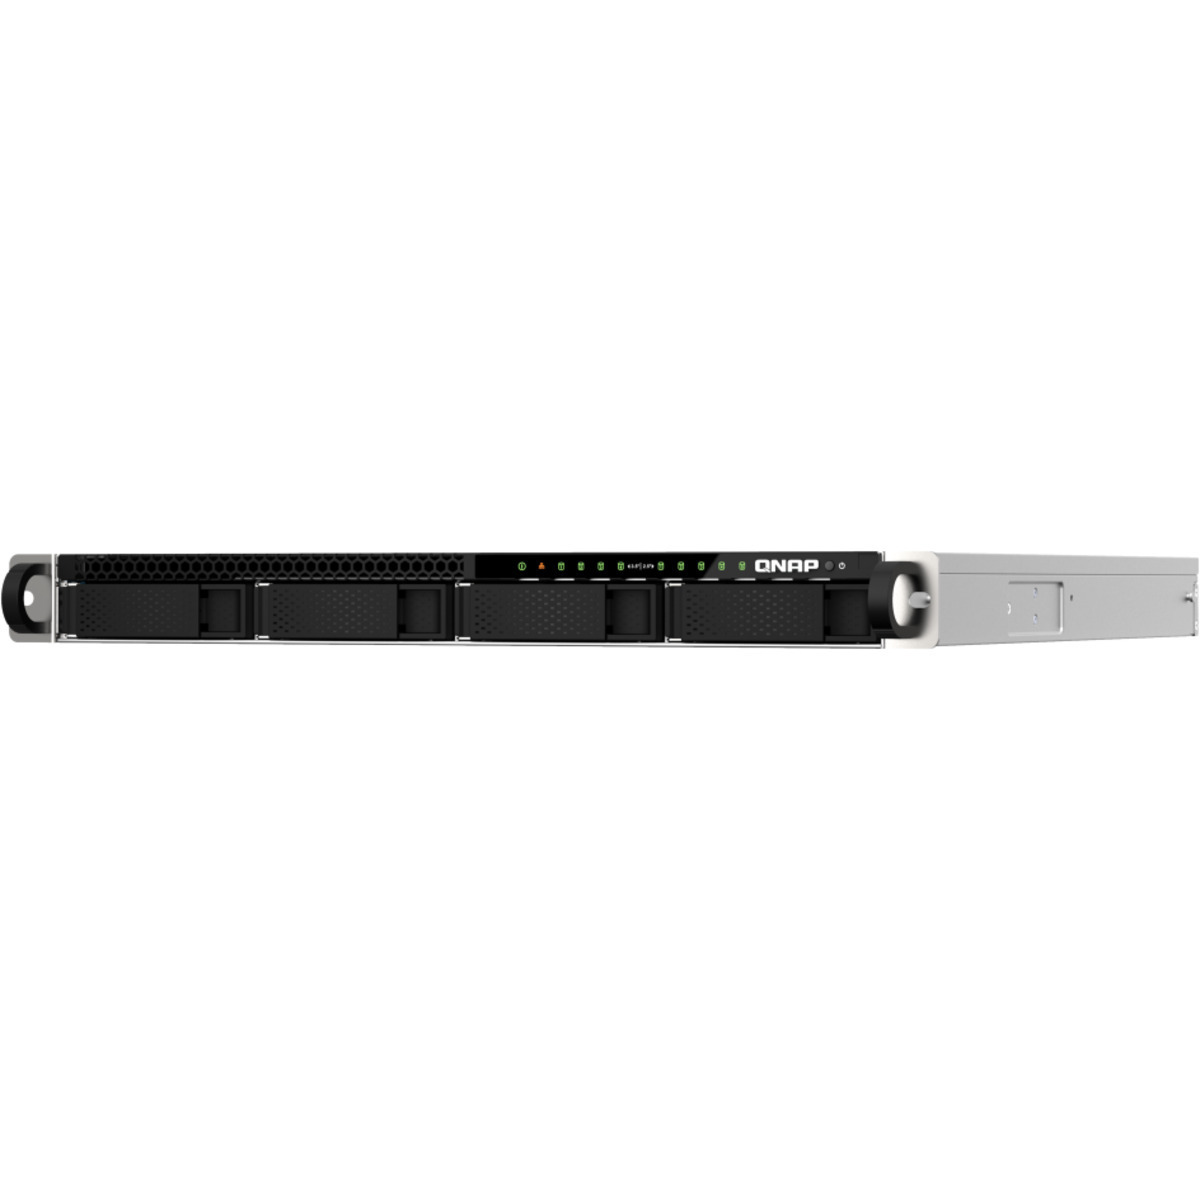 buy QNAP TS-h987XU-RP QuTS hero Edition 88tb RackMount NAS - Network Attached Storage Device 4x22000gb Seagate IronWolf Pro ST22000NT001 3.5 7200rpm SATA 6Gb/s HDD NAS Class Drives Installed - Burn-In Tested - nas headquarters buy network attached storage server device das new raid-5 free shipping usa spring sale TS-h987XU-RP QuTS hero Edition